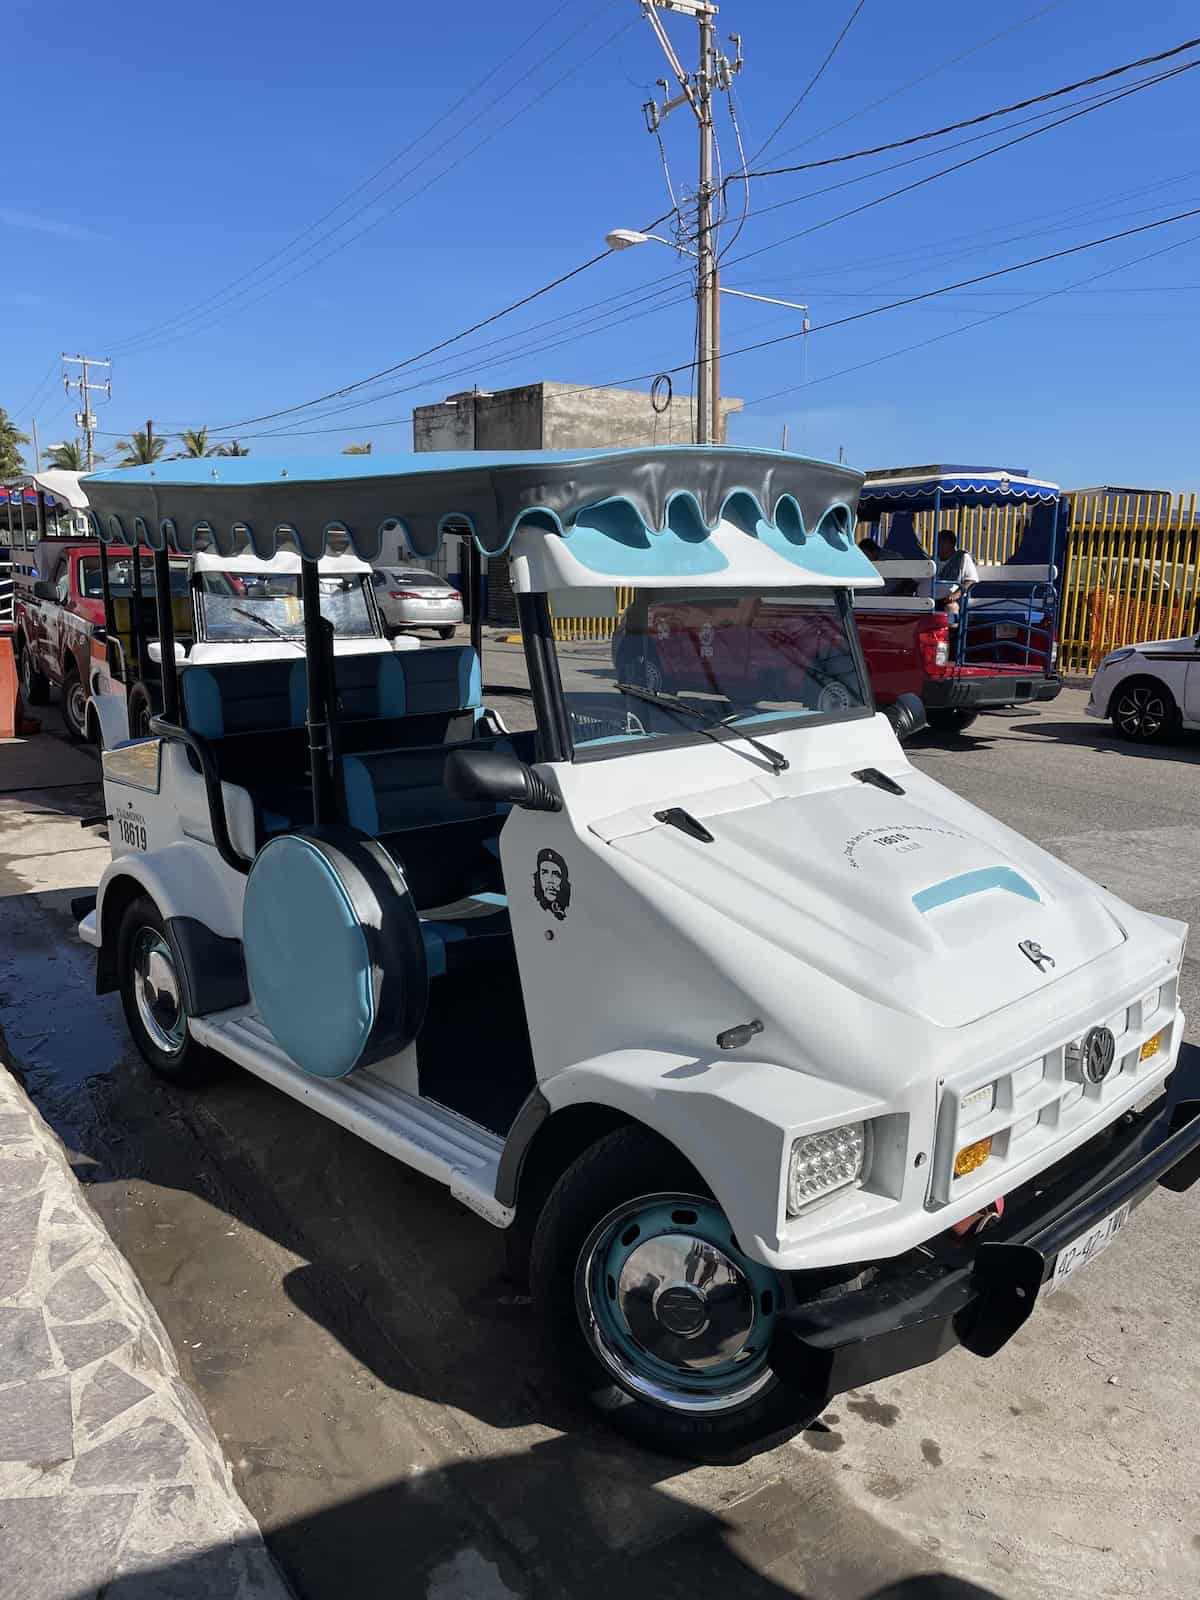 Tour jeep in Mexico.